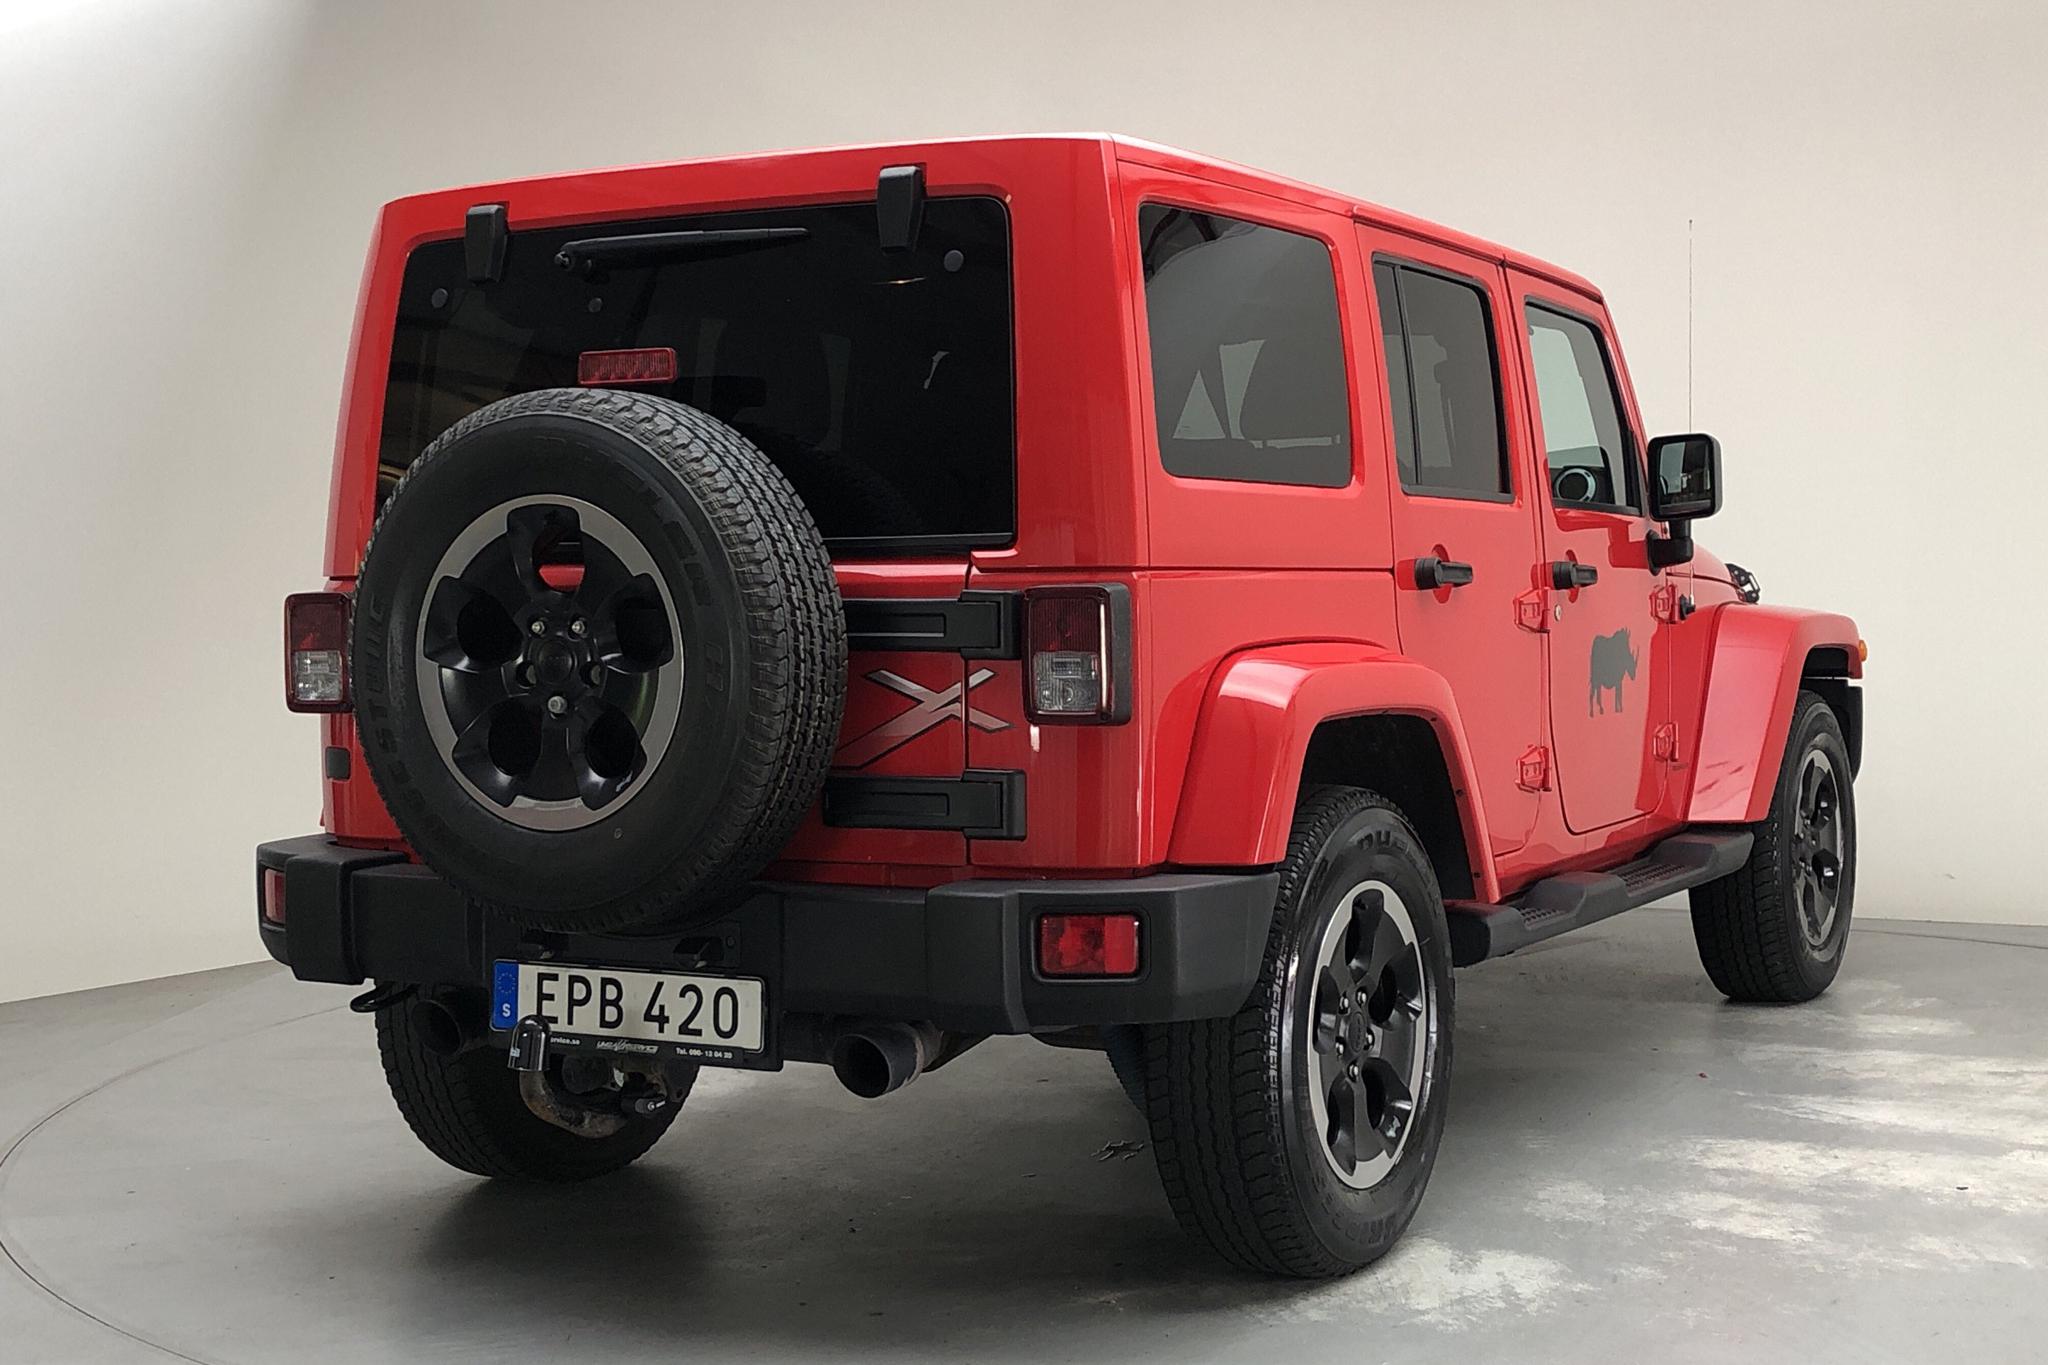 Jeep Wrangler Unlimited 3.6 V6 4dr (284hk) - 134 450 km - Automatic - red - 2015